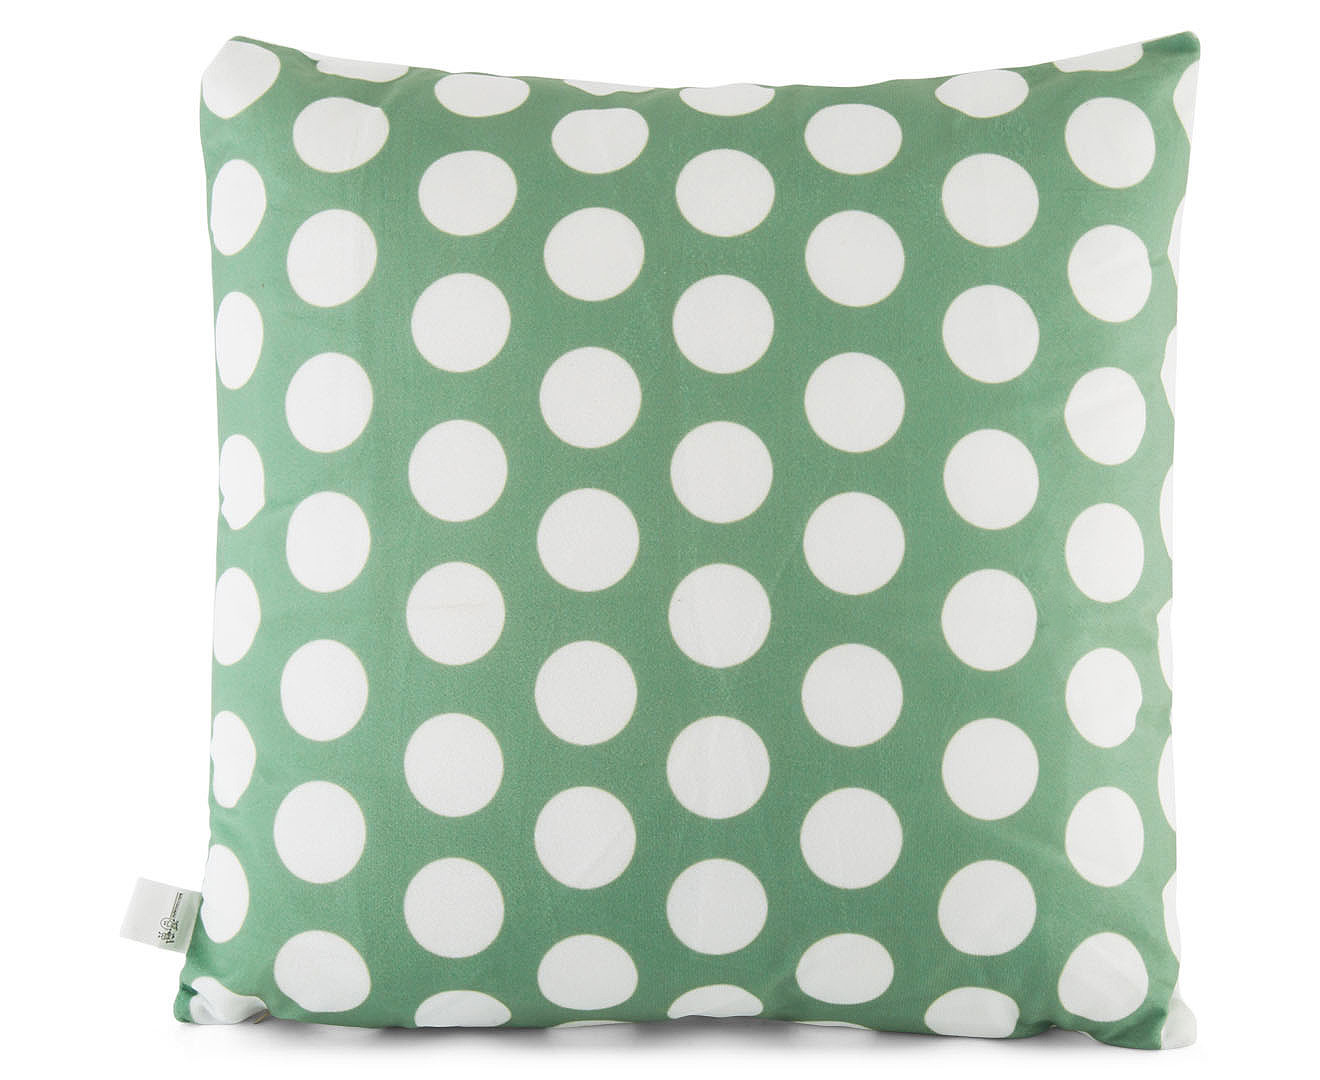 Kids Concepts Dots Square Pillow - Green